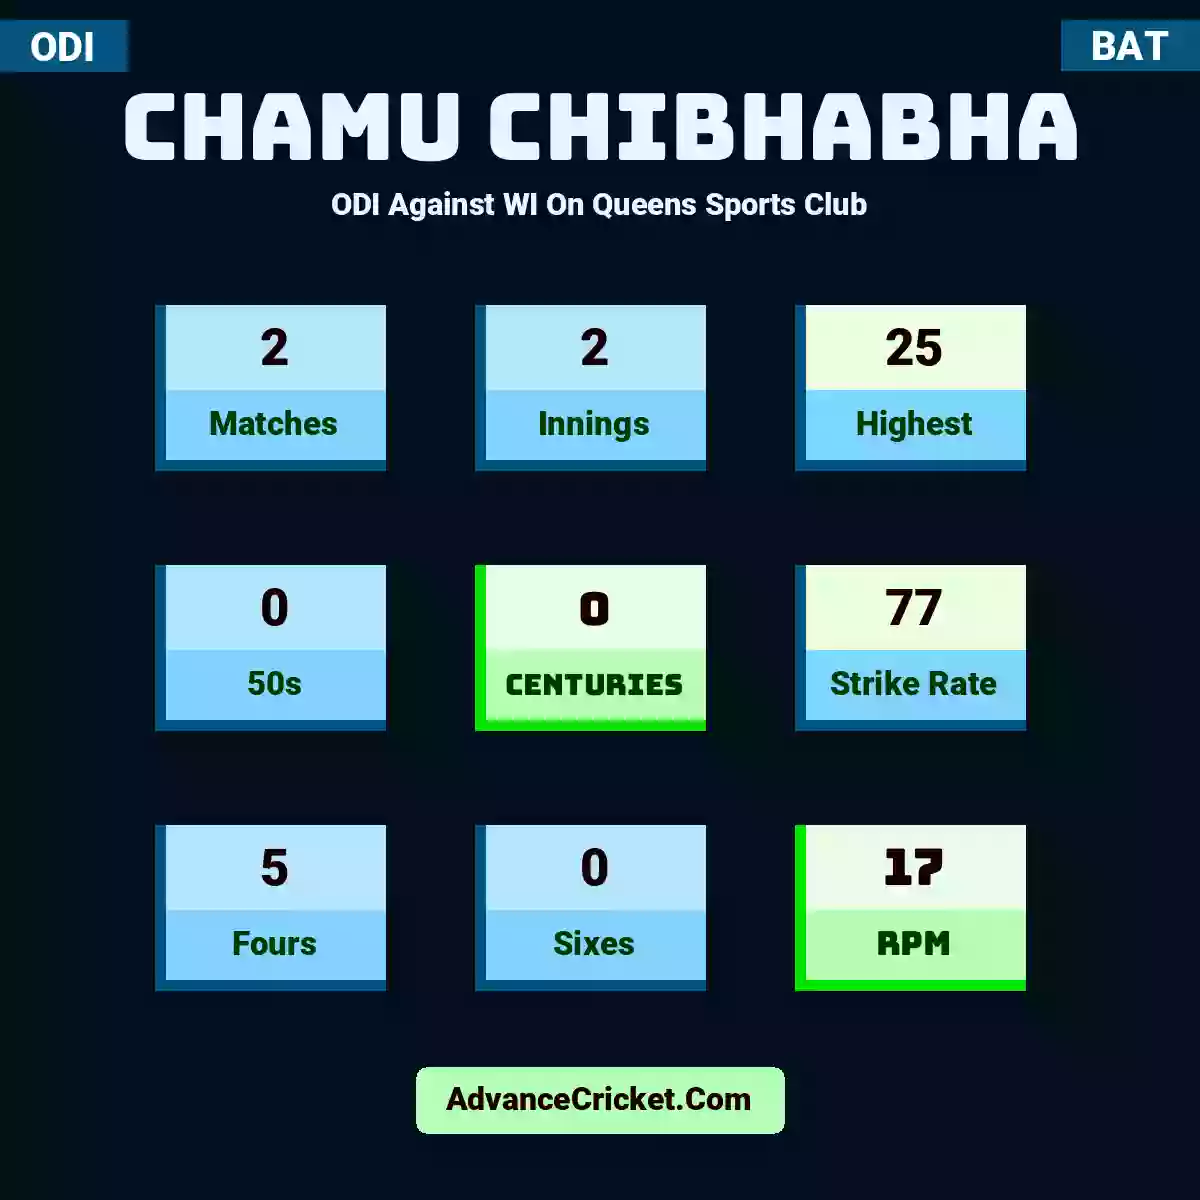 Chamu Chibhabha ODI  Against WI On Queens Sports Club, Chamu Chibhabha played 2 matches, scored 25 runs as highest, 0 half-centuries, and 0 centuries, with a strike rate of 77. C.Chibhabha hit 5 fours and 0 sixes, with an RPM of 17.